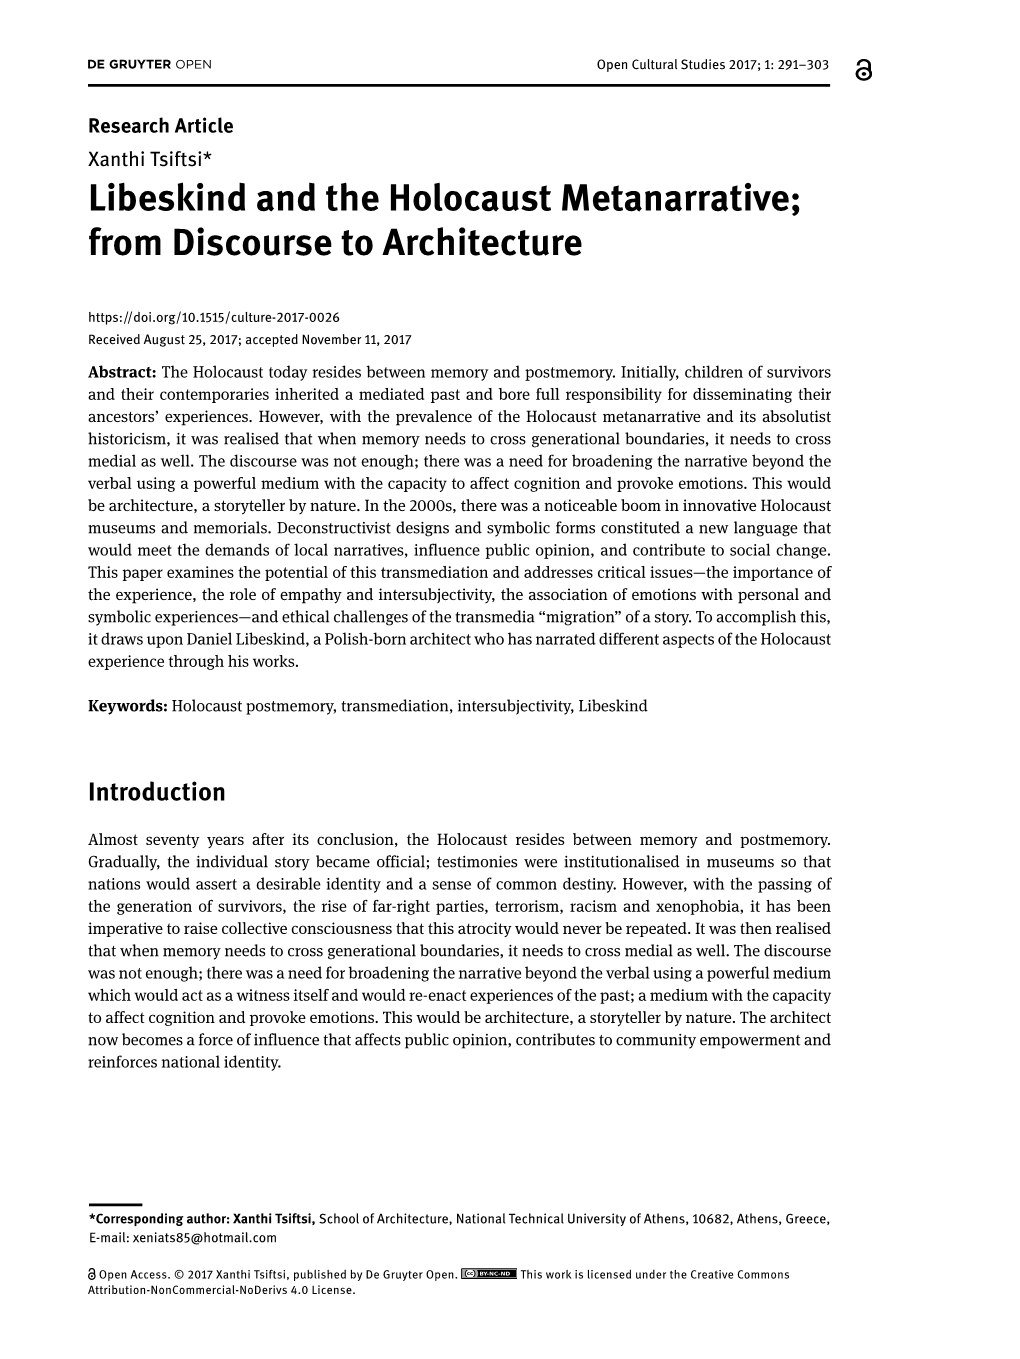 Libeskind and the Holocaust Metanarrative; from Discourse to Architecture